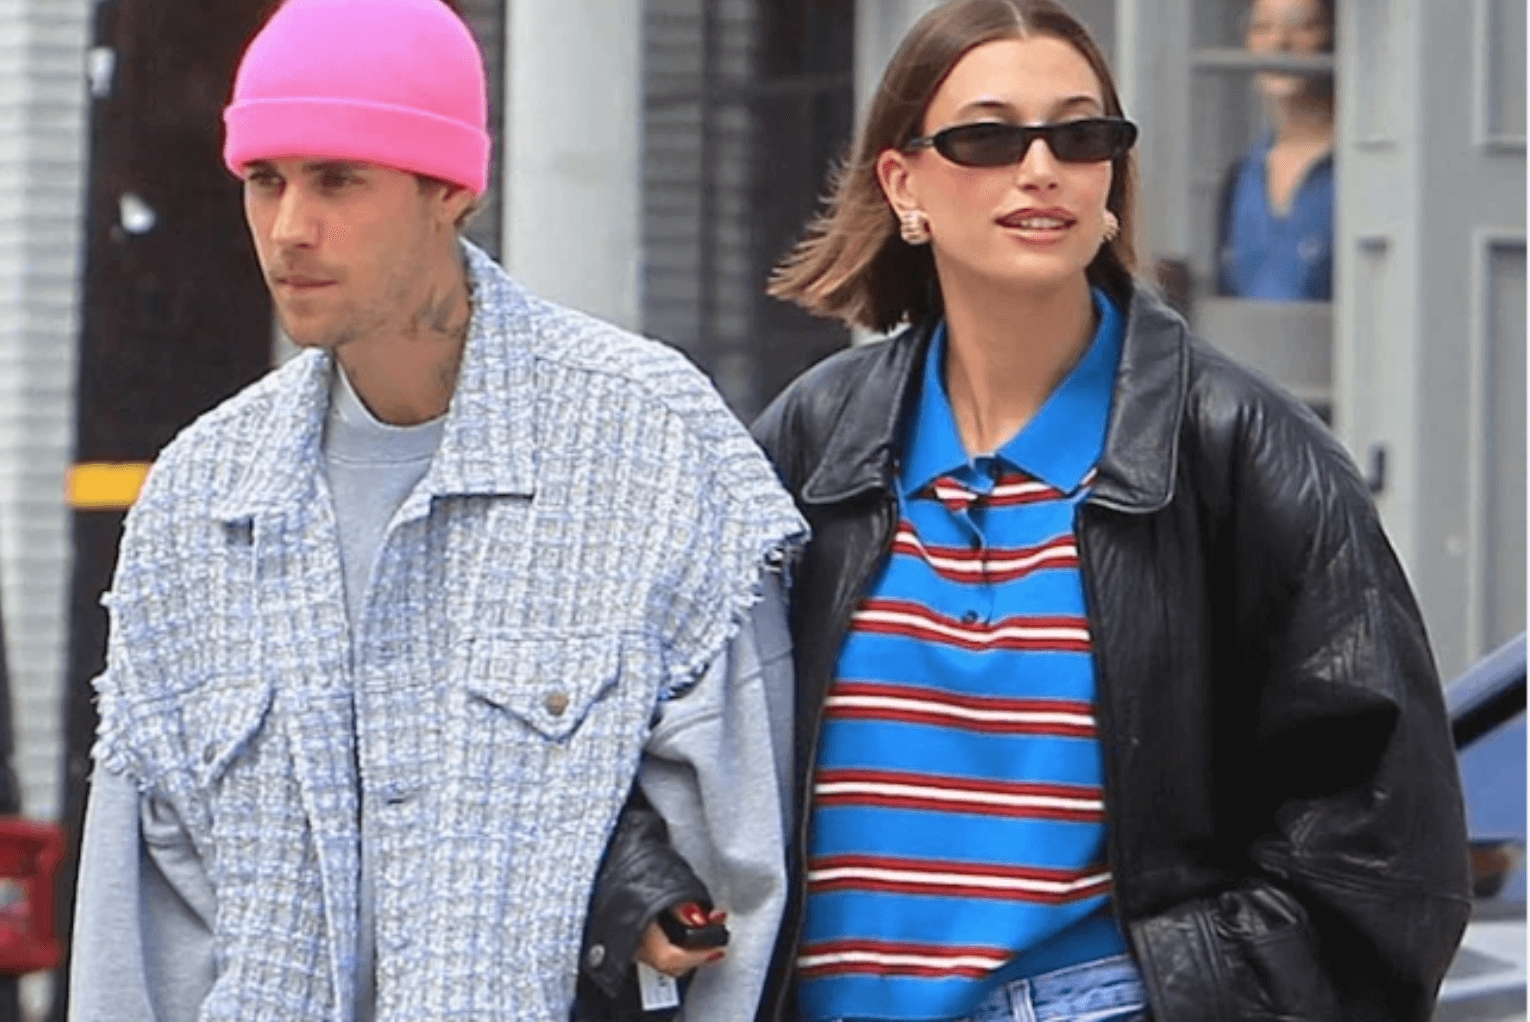 ‘Praise God!’: Justin and Hailey Bieber’s Parents Give Glory to the Lord As Pregnancy Announcement Goes Viral